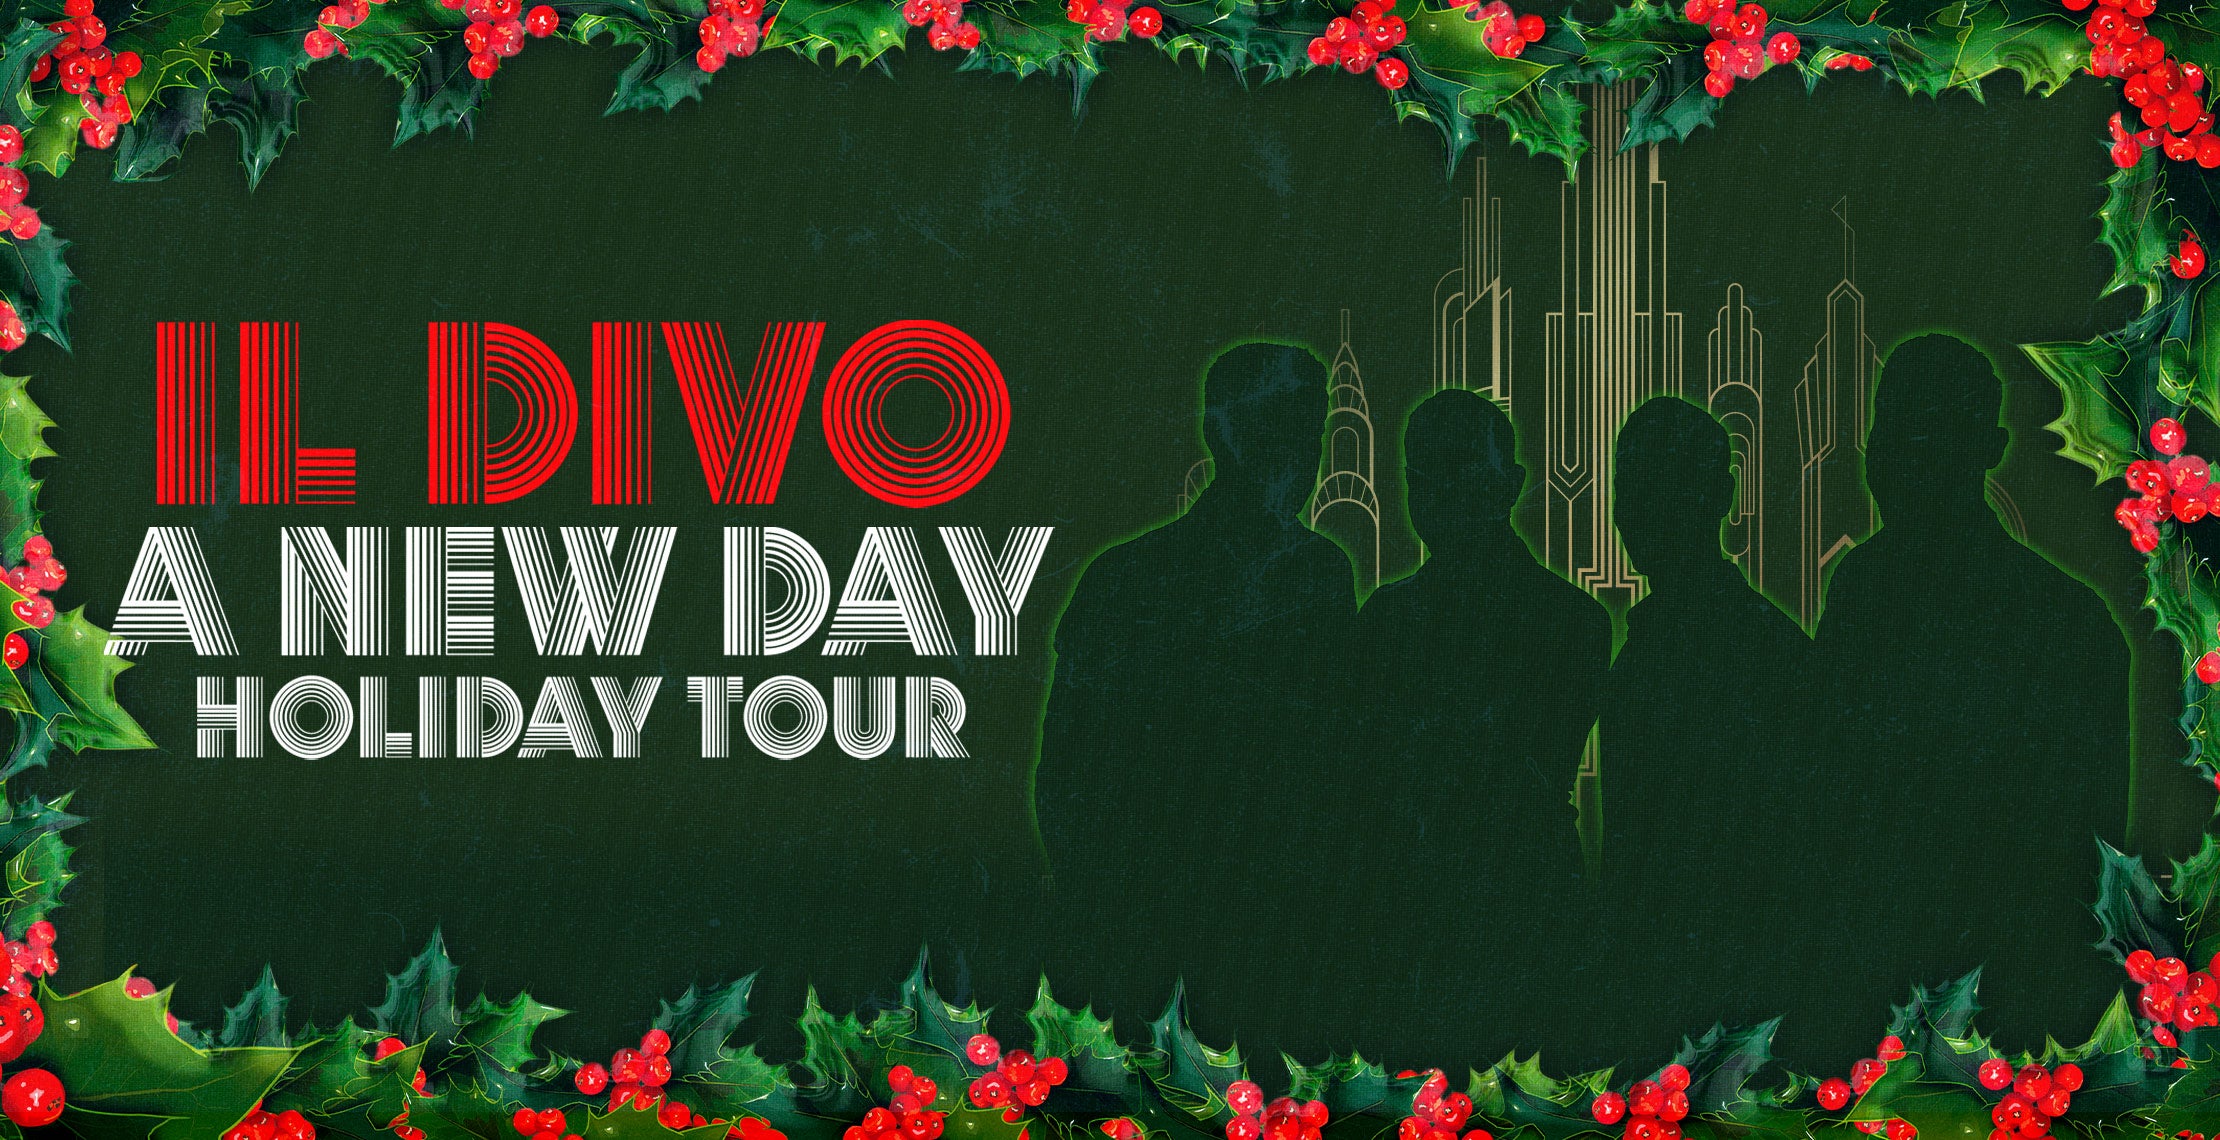 Il Divo: A New Day Holiday Tour